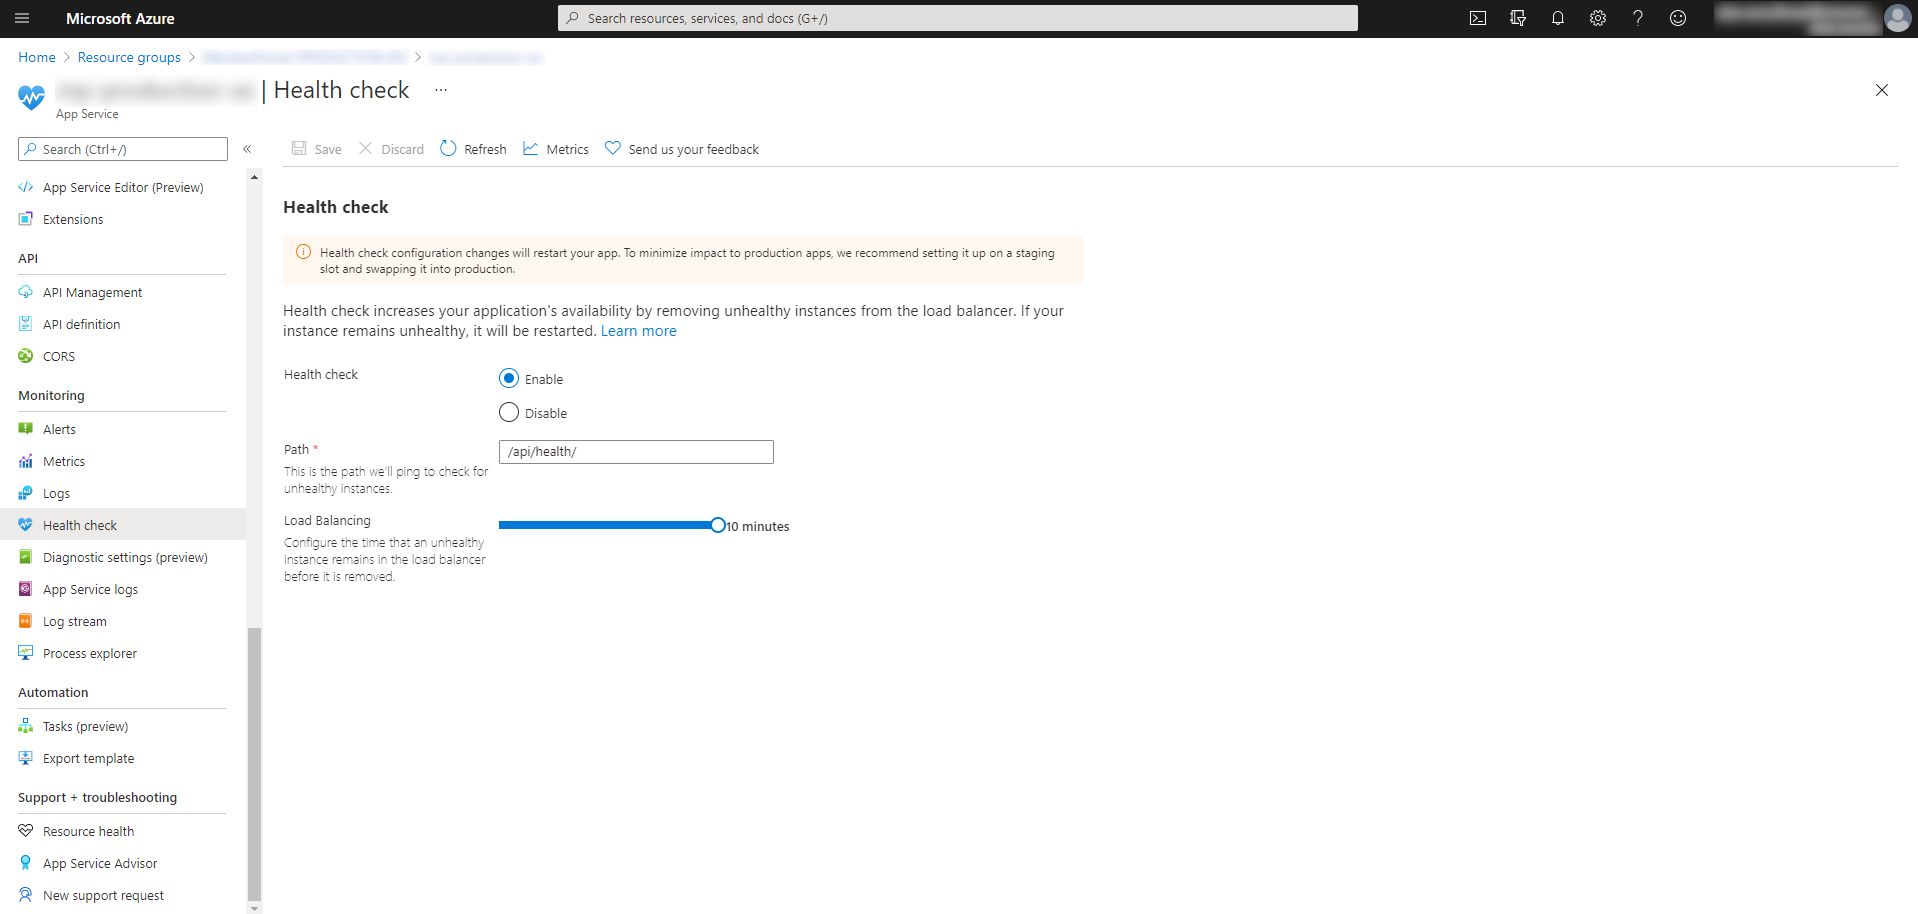 Configuring the health check endpoint in the Azure portal